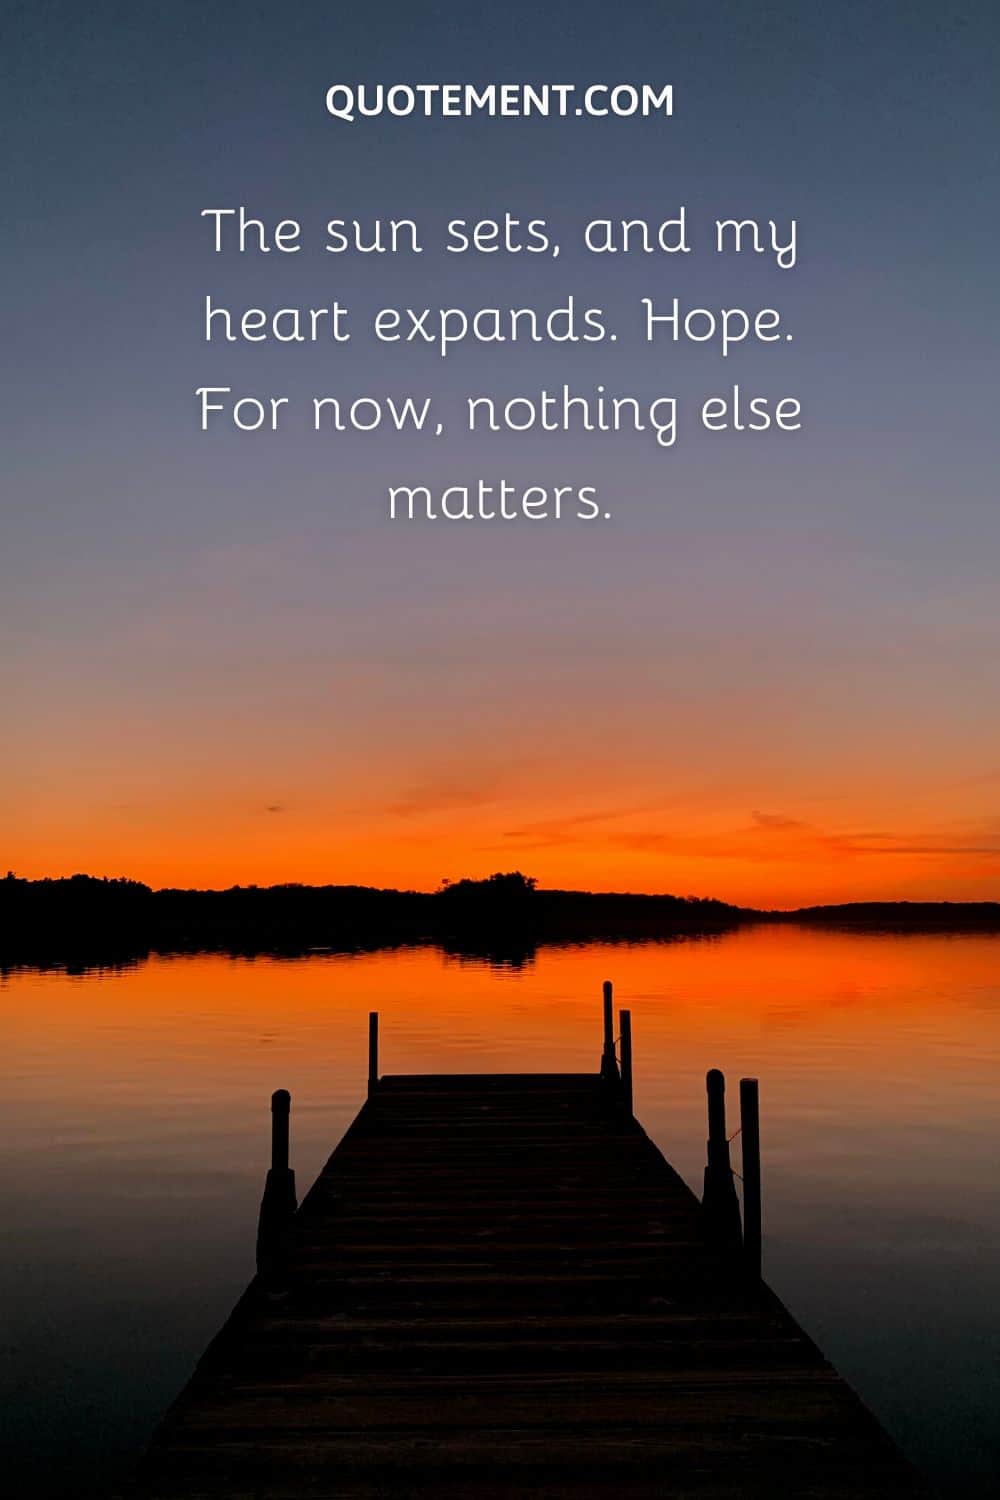 The sun sets, and my heart expands. Hope. For now, nothing else matters.